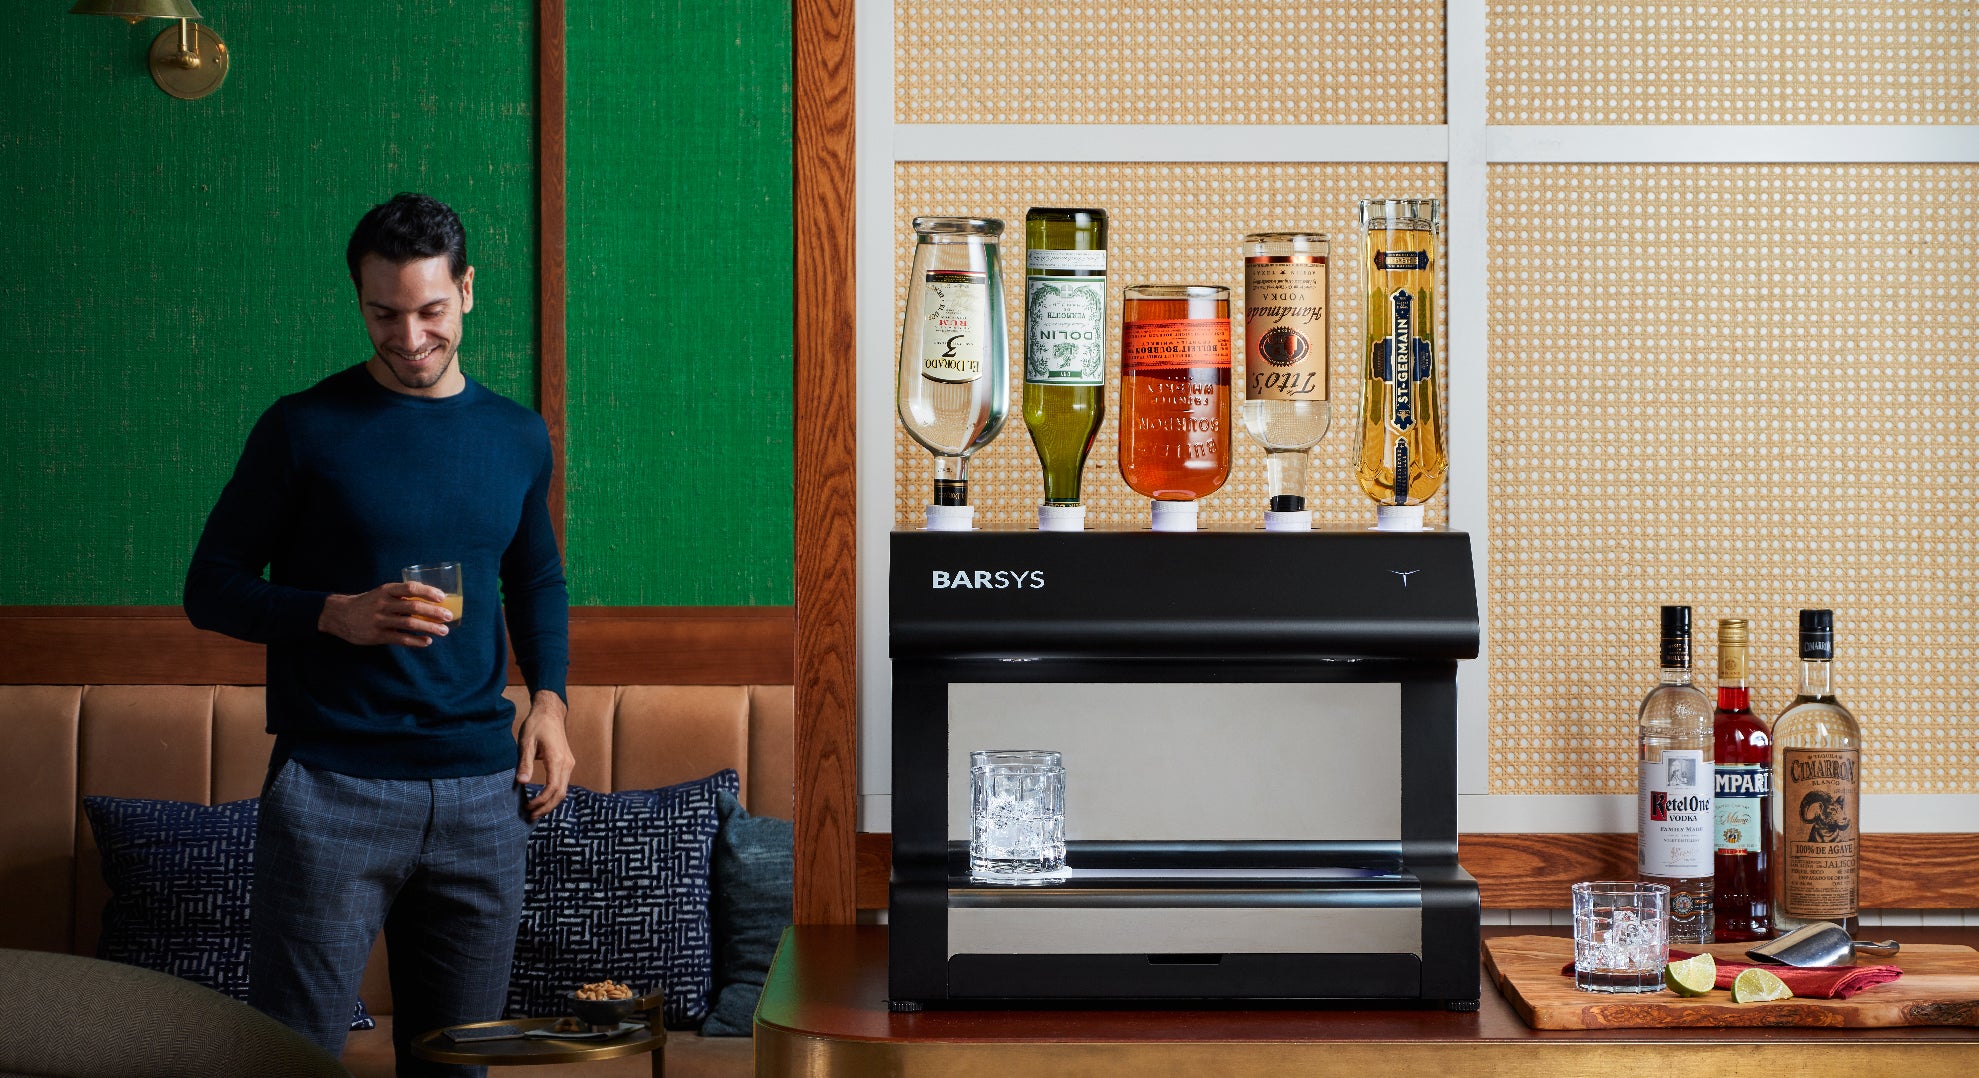 This Home Automated Cocktail Maker Creates Perfect Drinks